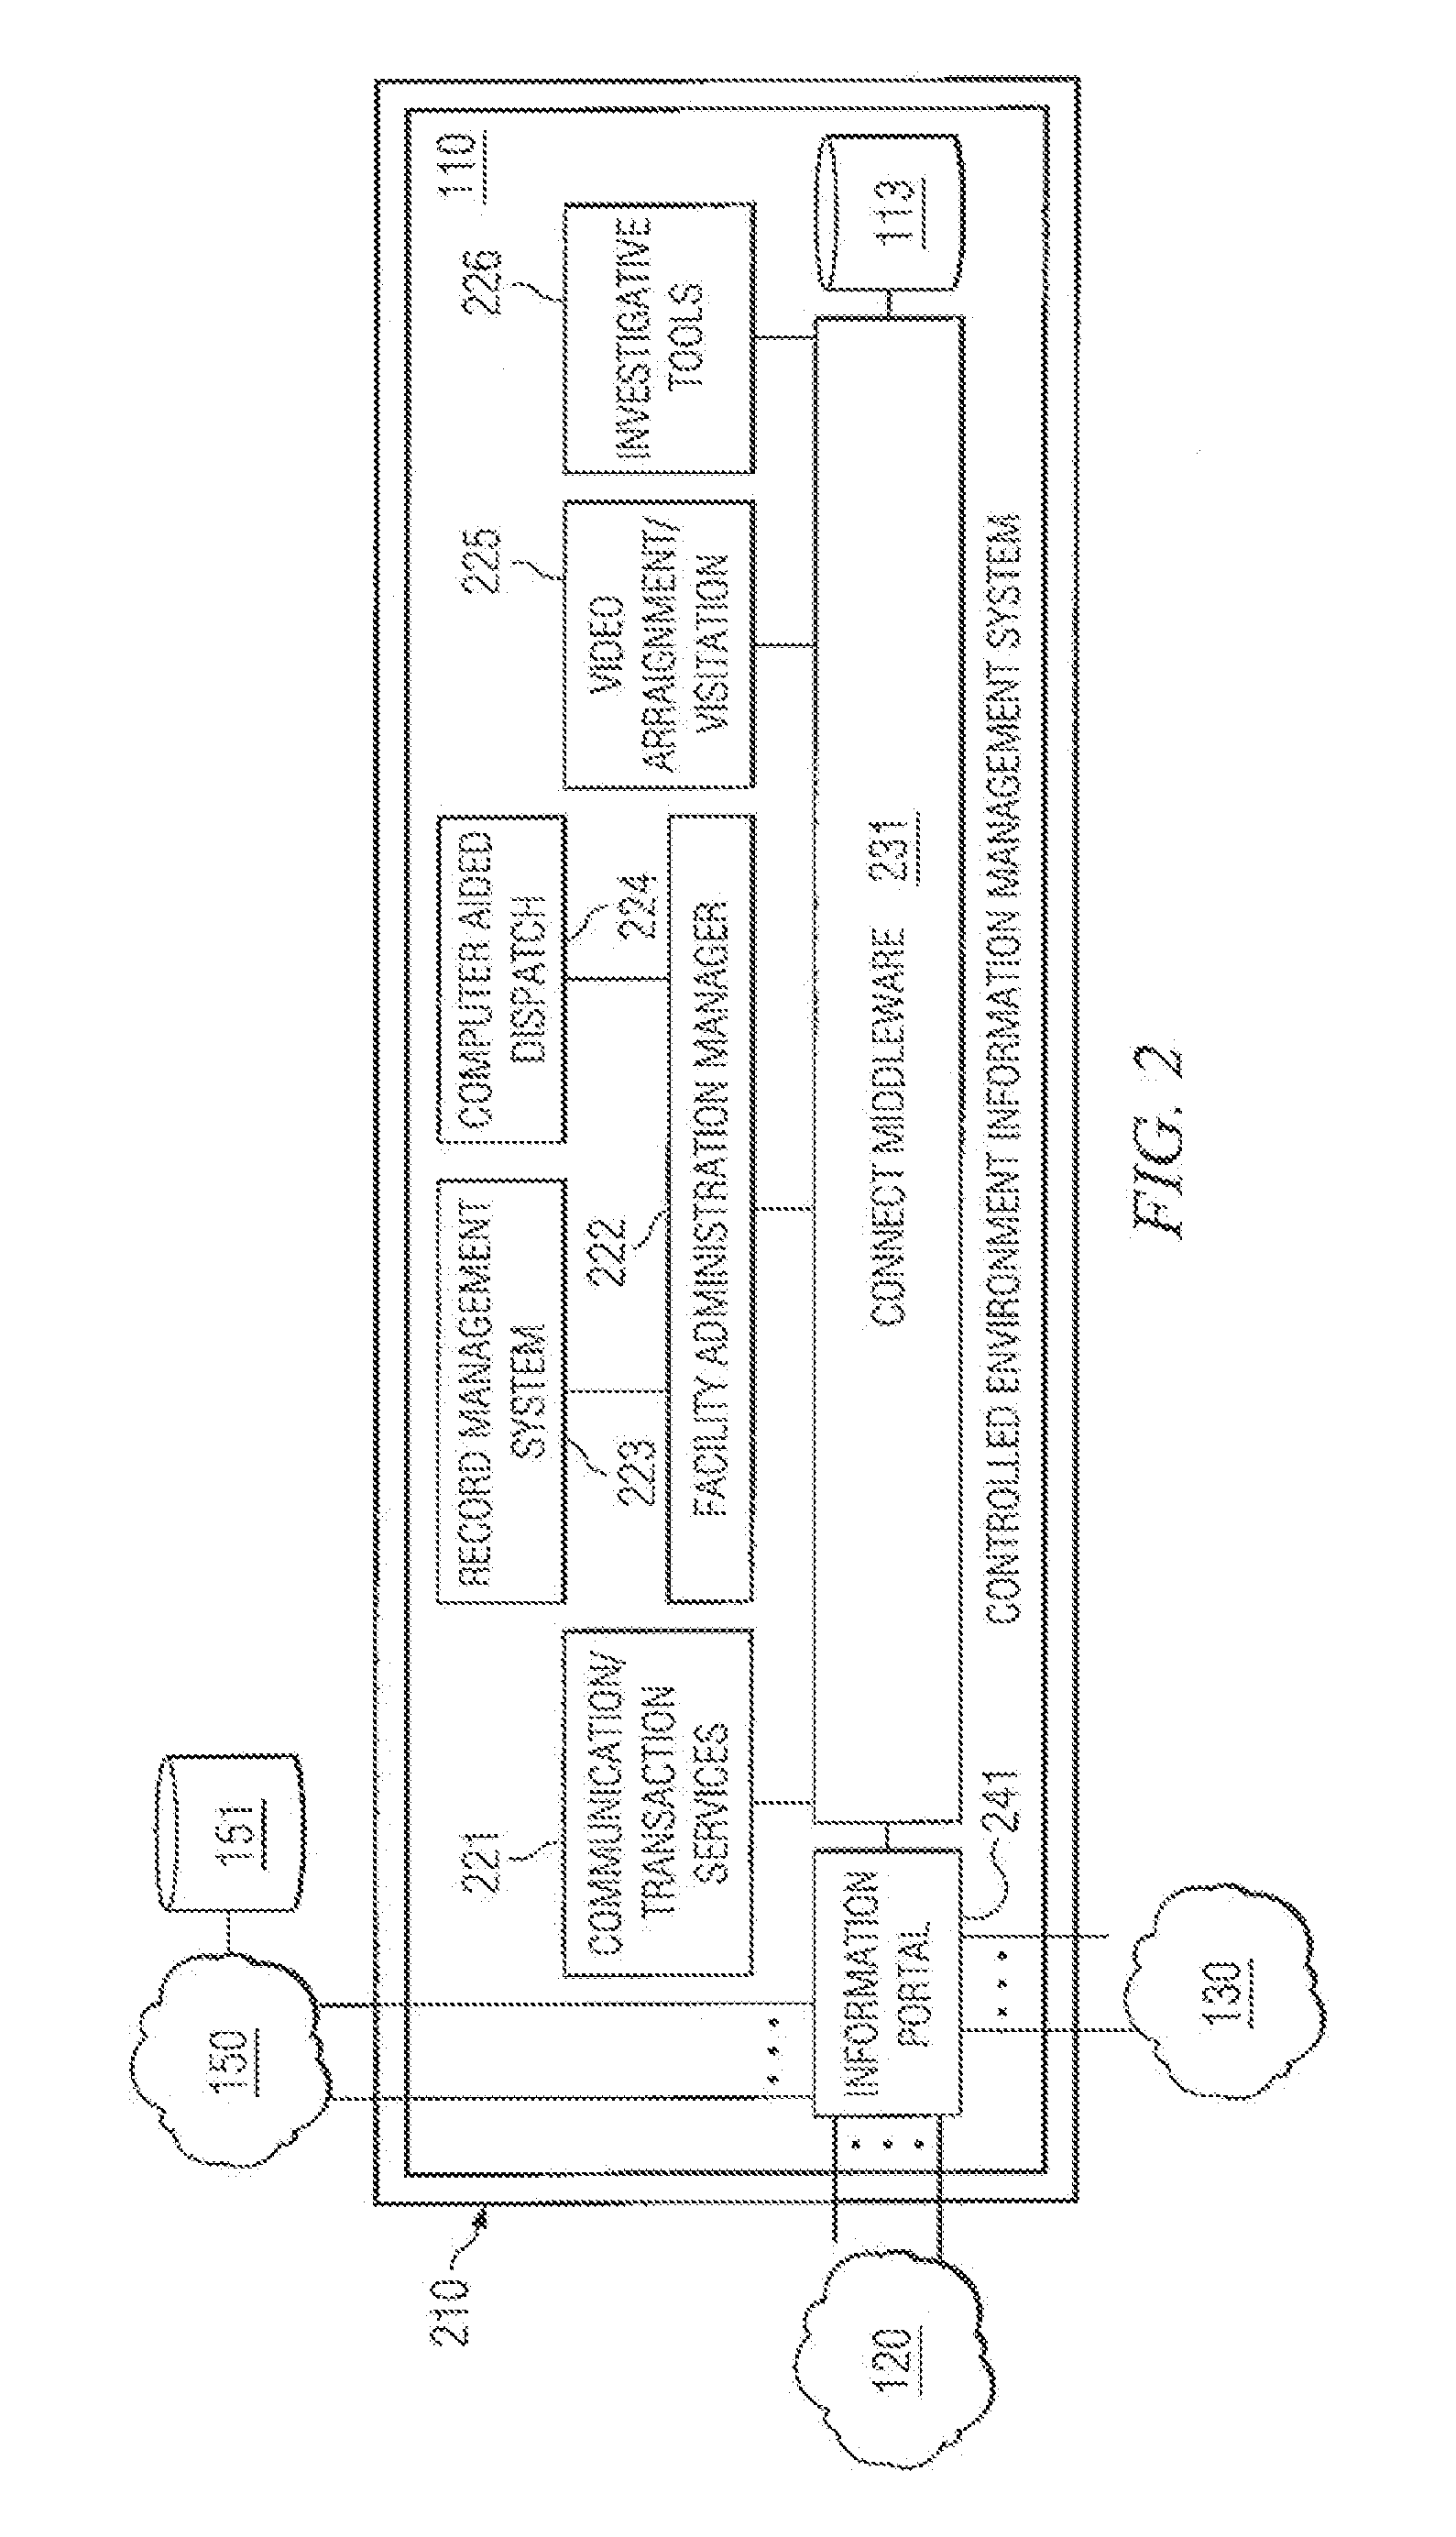 System and Method for Call Treatment Using a Third Party Database